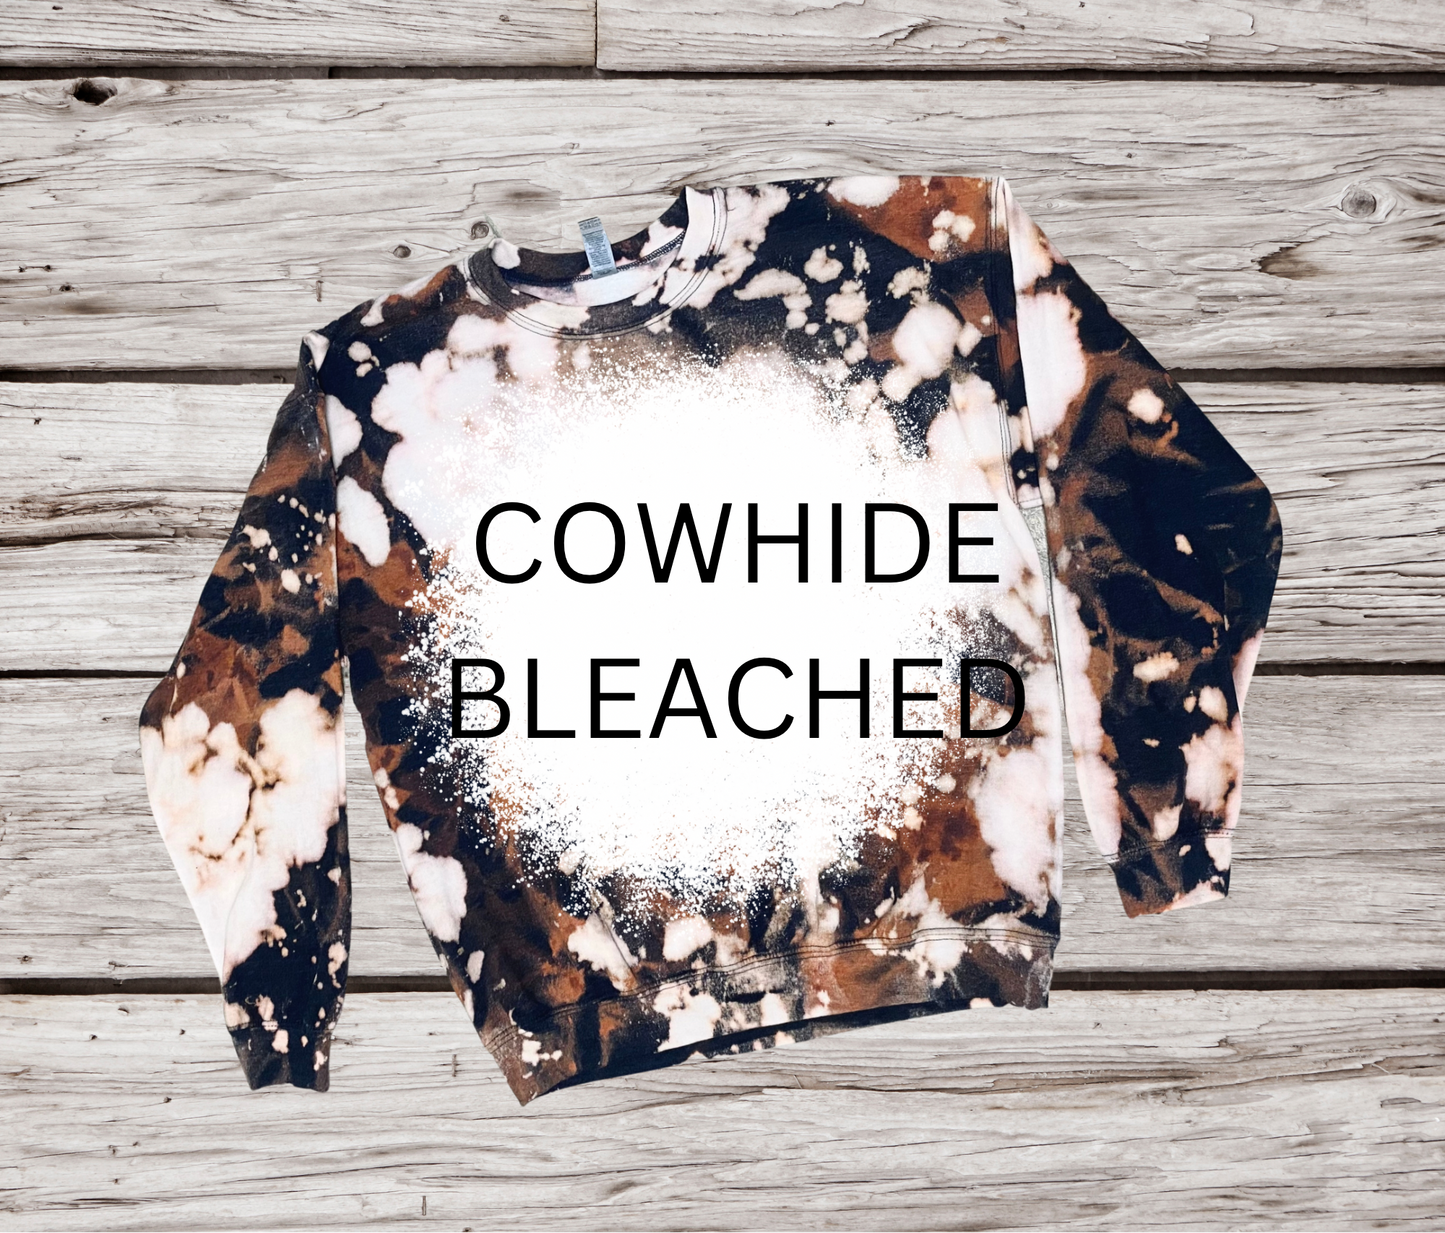 BETH DUTTON IN TRAINING DESIGN! YOU CHOOSE COLOR AND STYLE! TEE OR CREWNECK! BLEACHED OR NON-BLEACHED